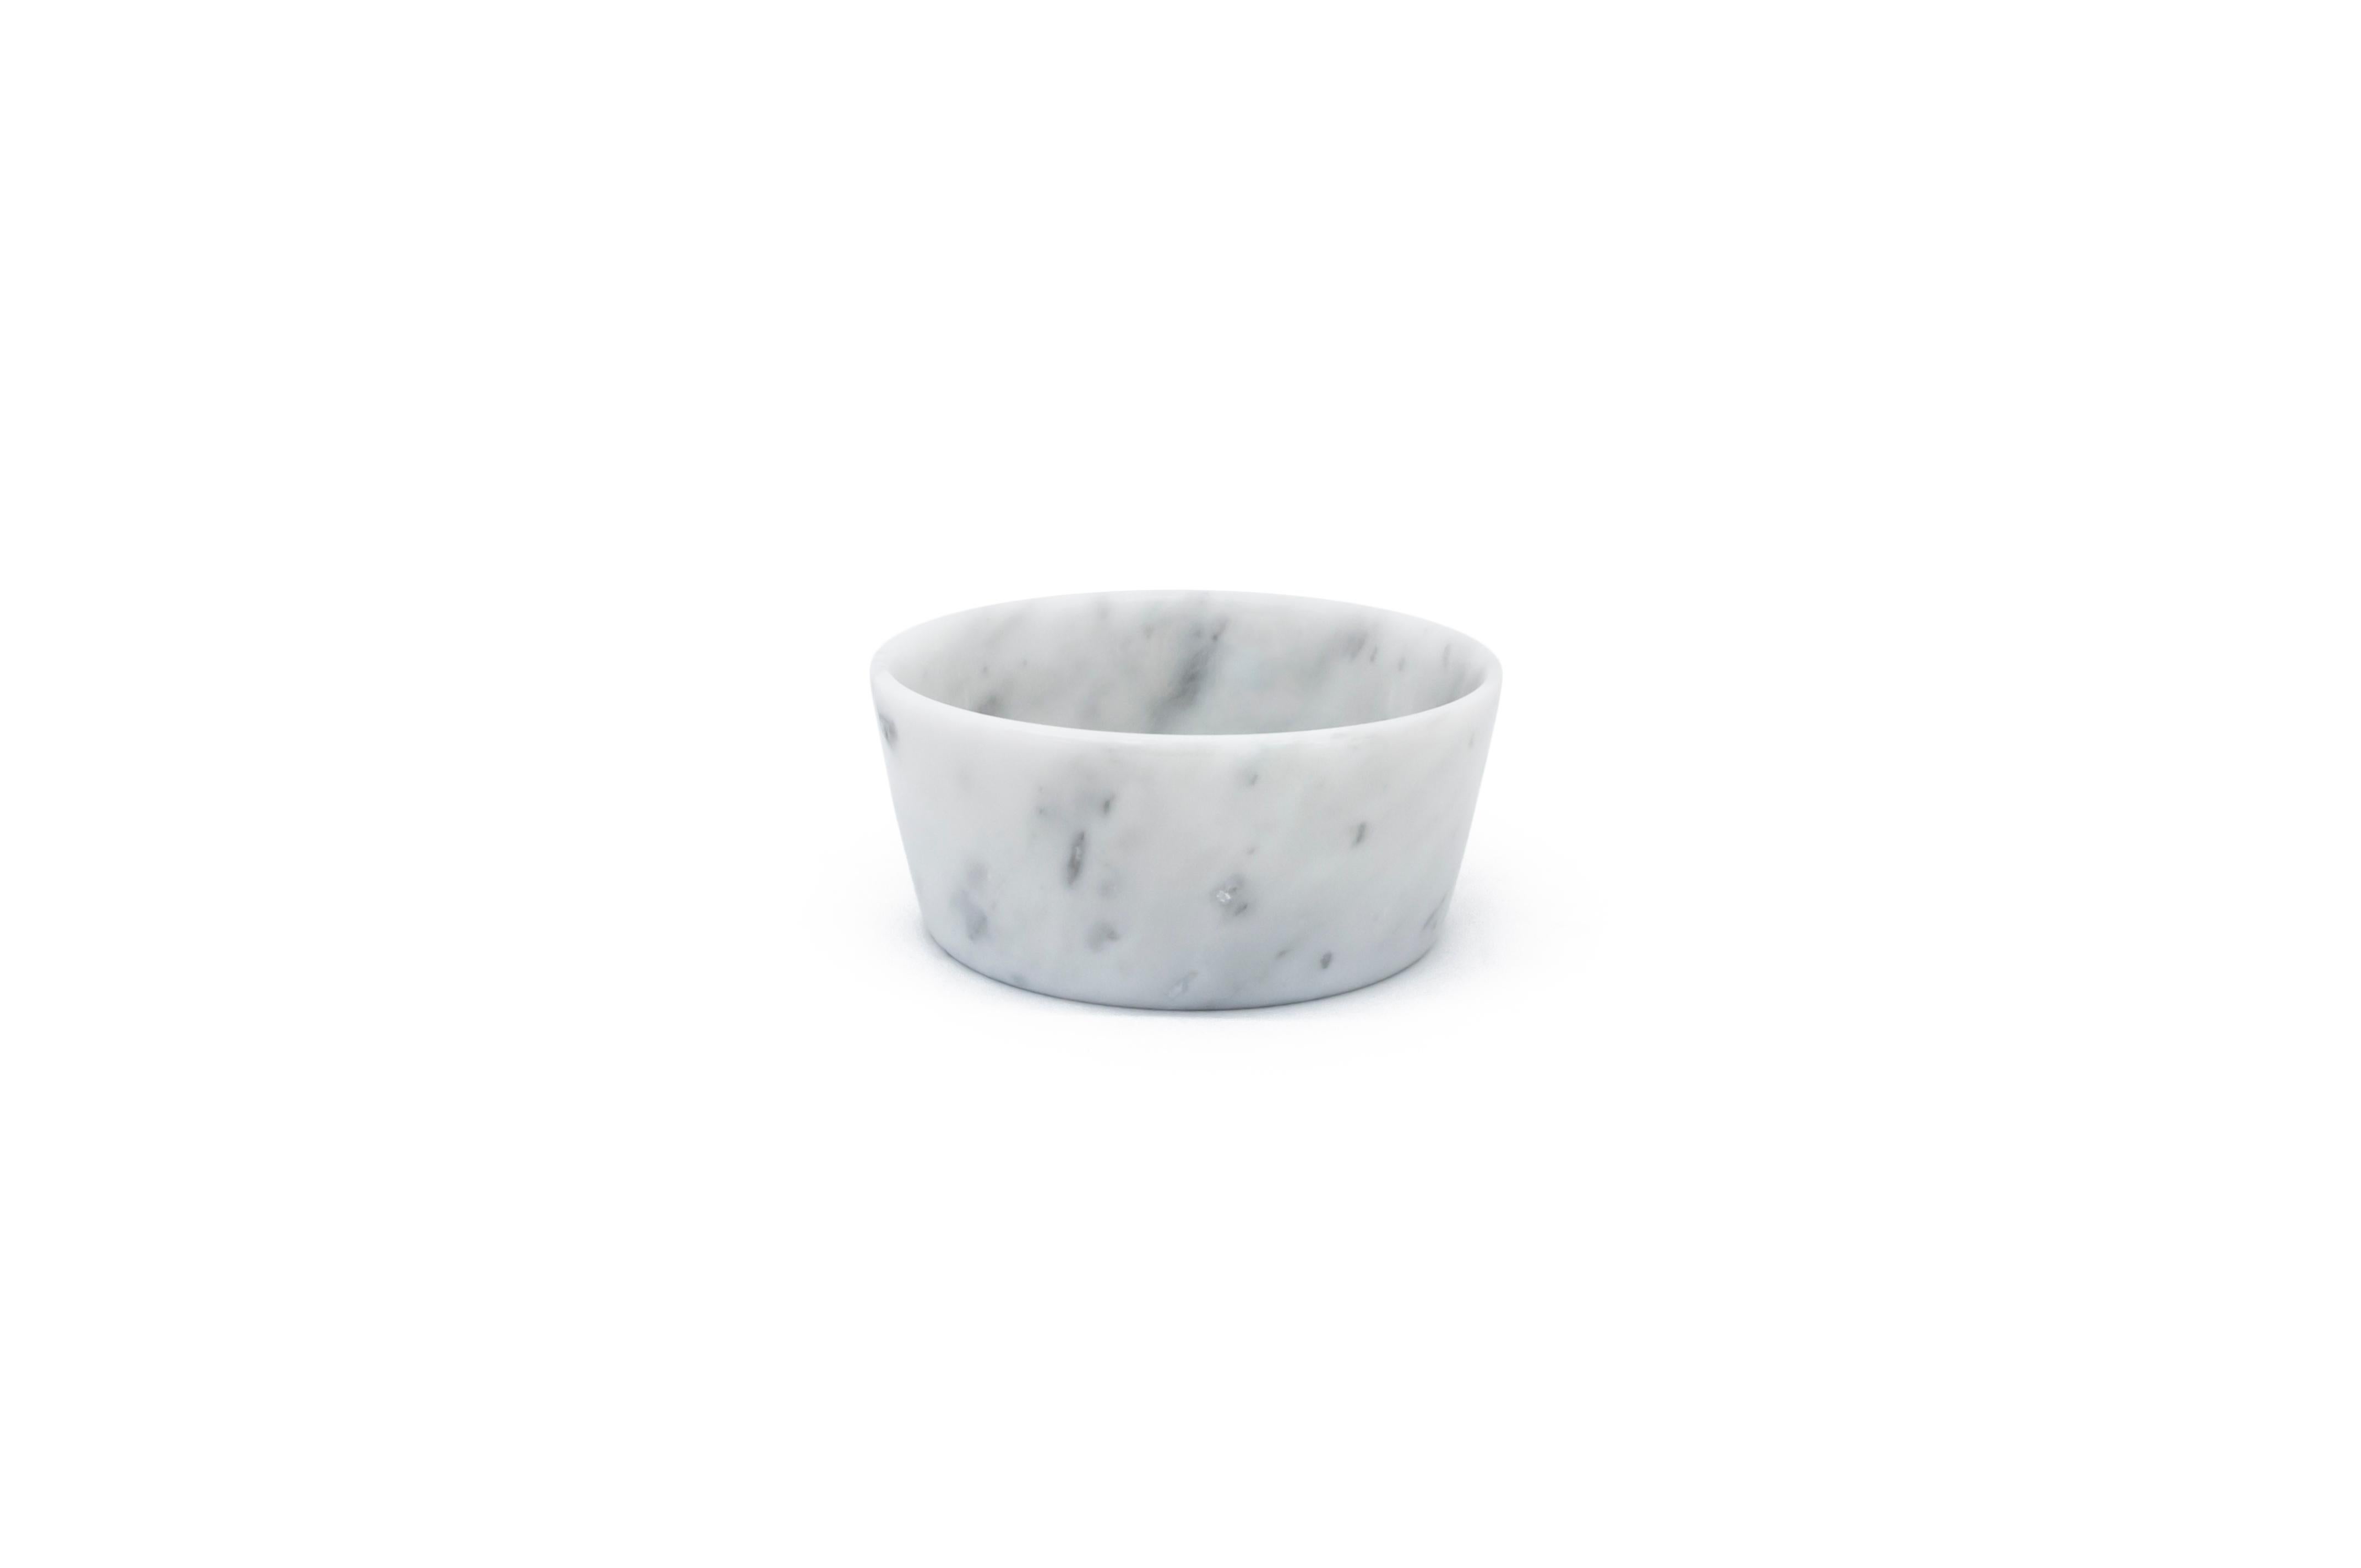 White Carrara marble bowl for cats and dogs, made in Italy, Carrara. Size small.
Each piece is in a way unique (every marble block is different in veins and shades) and handmade by Italian artisans specialized over generations in processing marble.